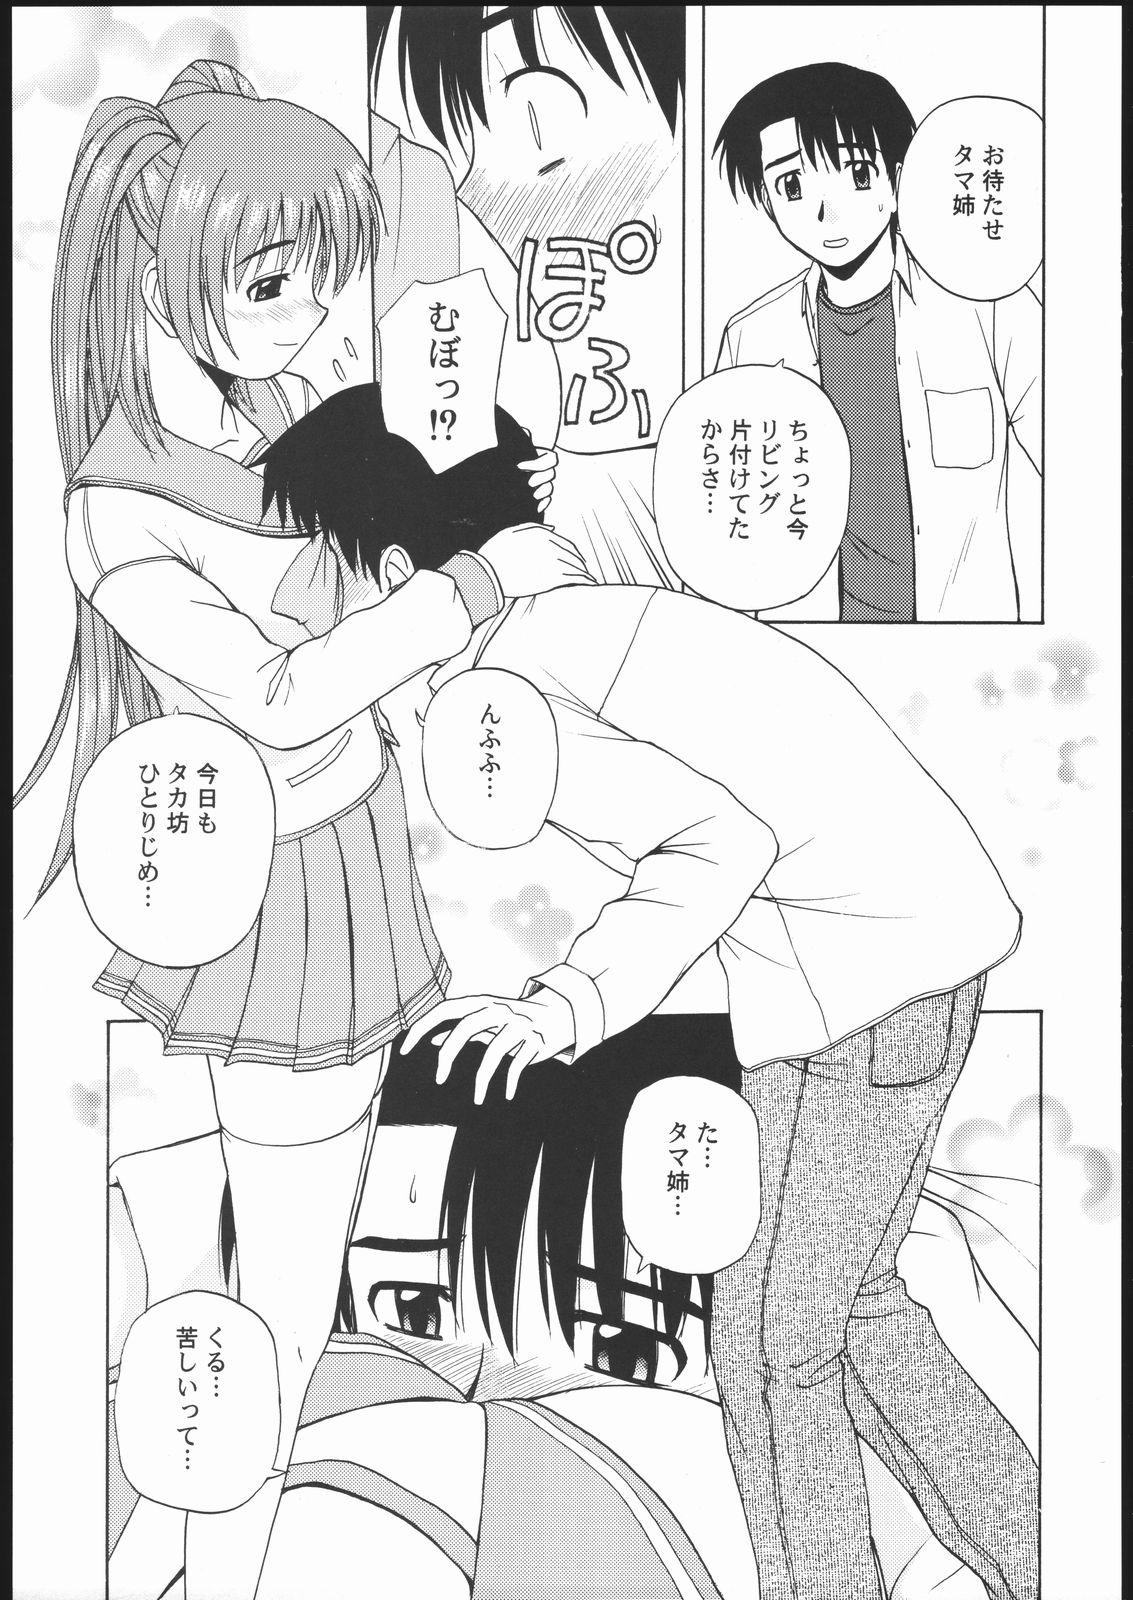 Soloboy Tama-nee to Issho 2 - Toheart2 Dykes - Page 6